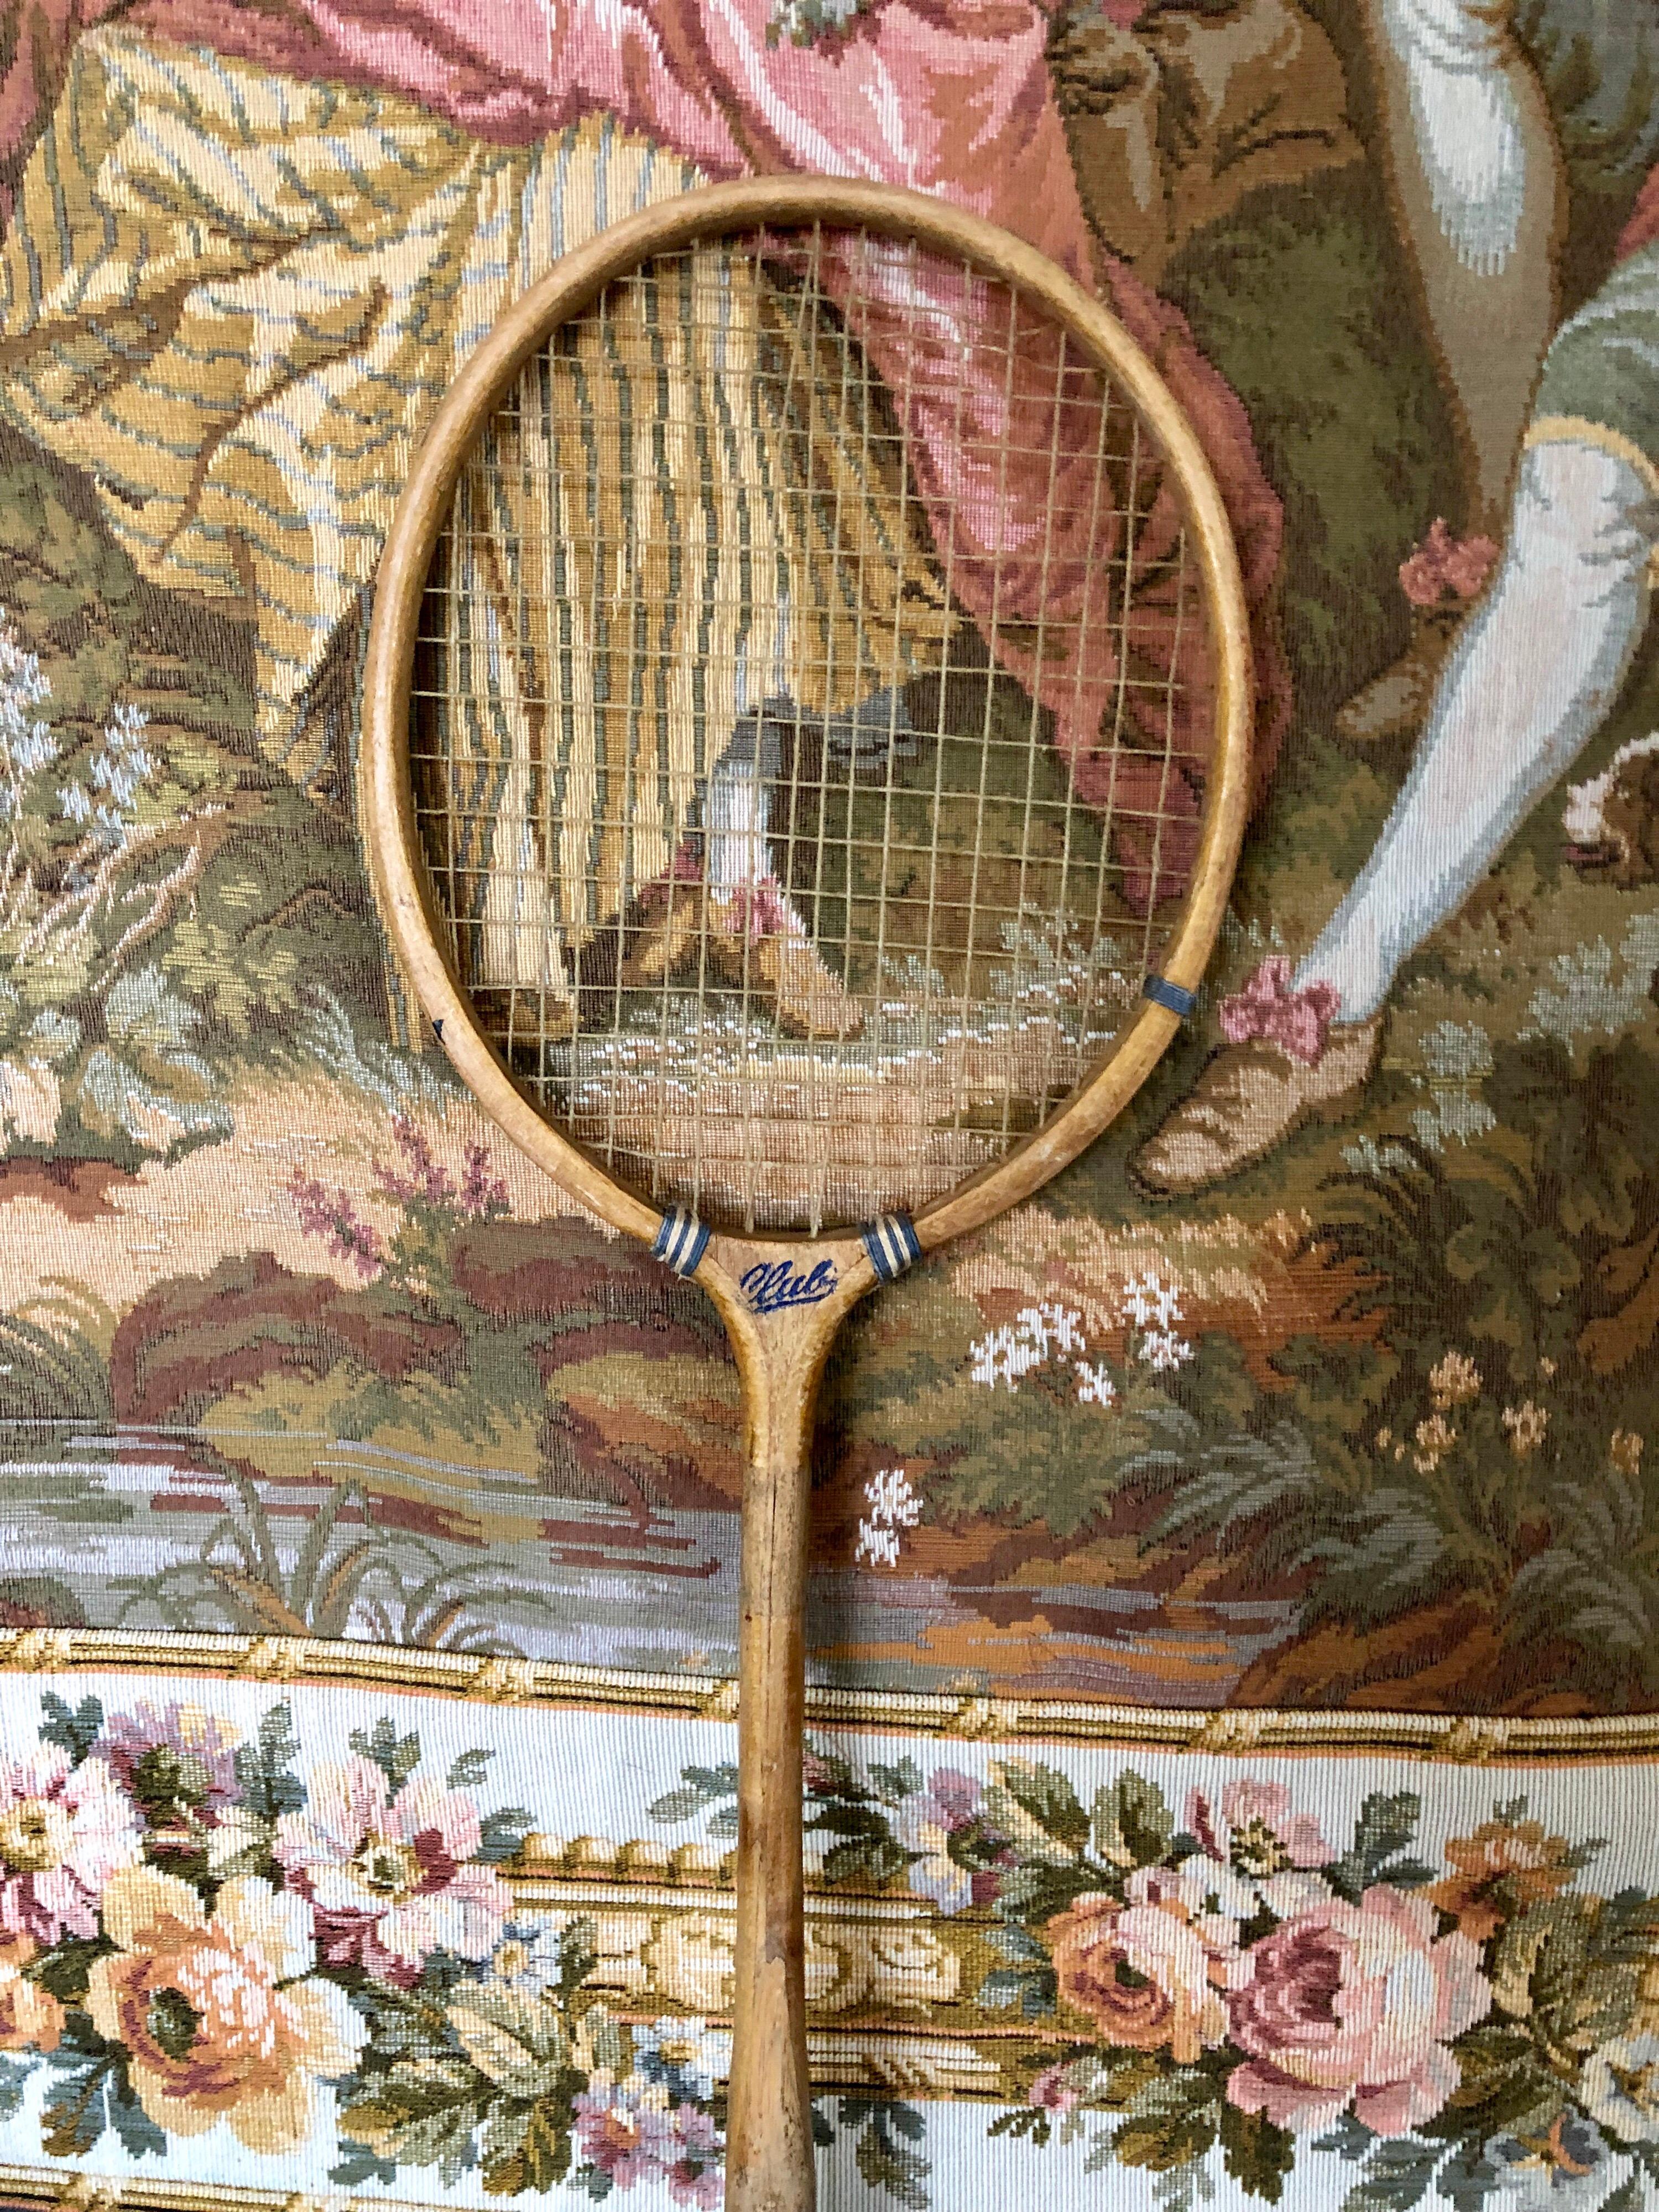 Vintage antique wooden Badminton racket made by Club
Wood racquet 27